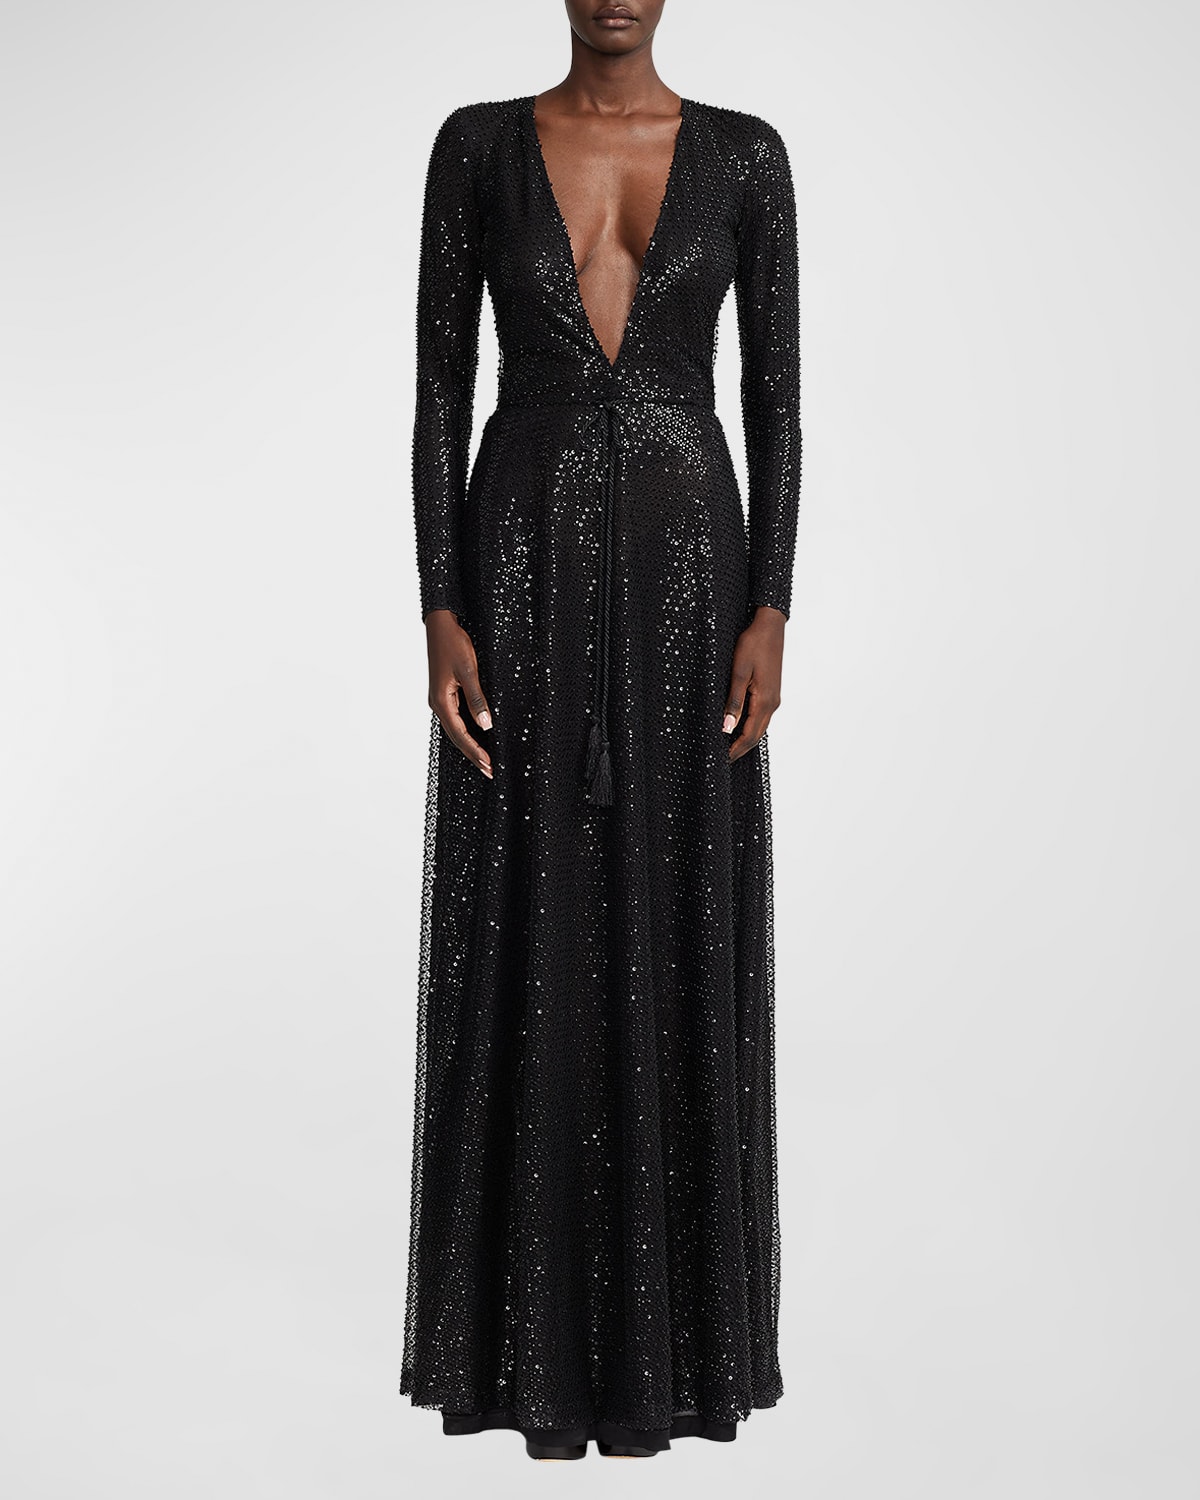 Carmelo Plunging Embellished Long-Sleeve Gown